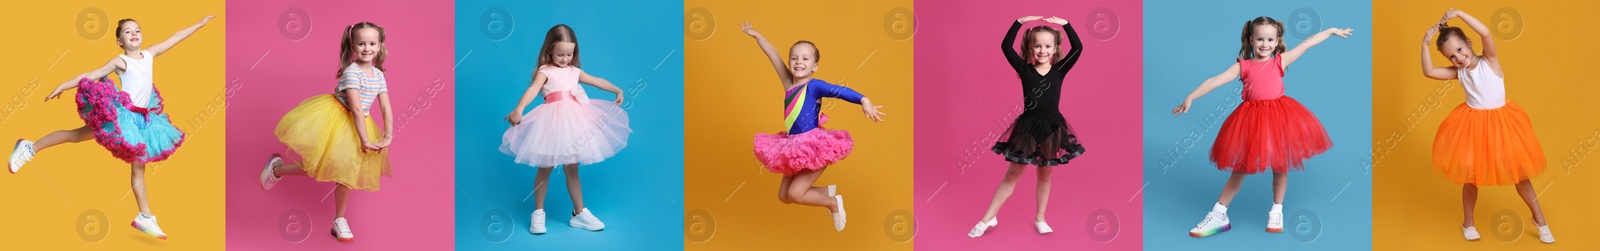 Image of Cute little girls dancing on different colors backgrounds, collection of photos